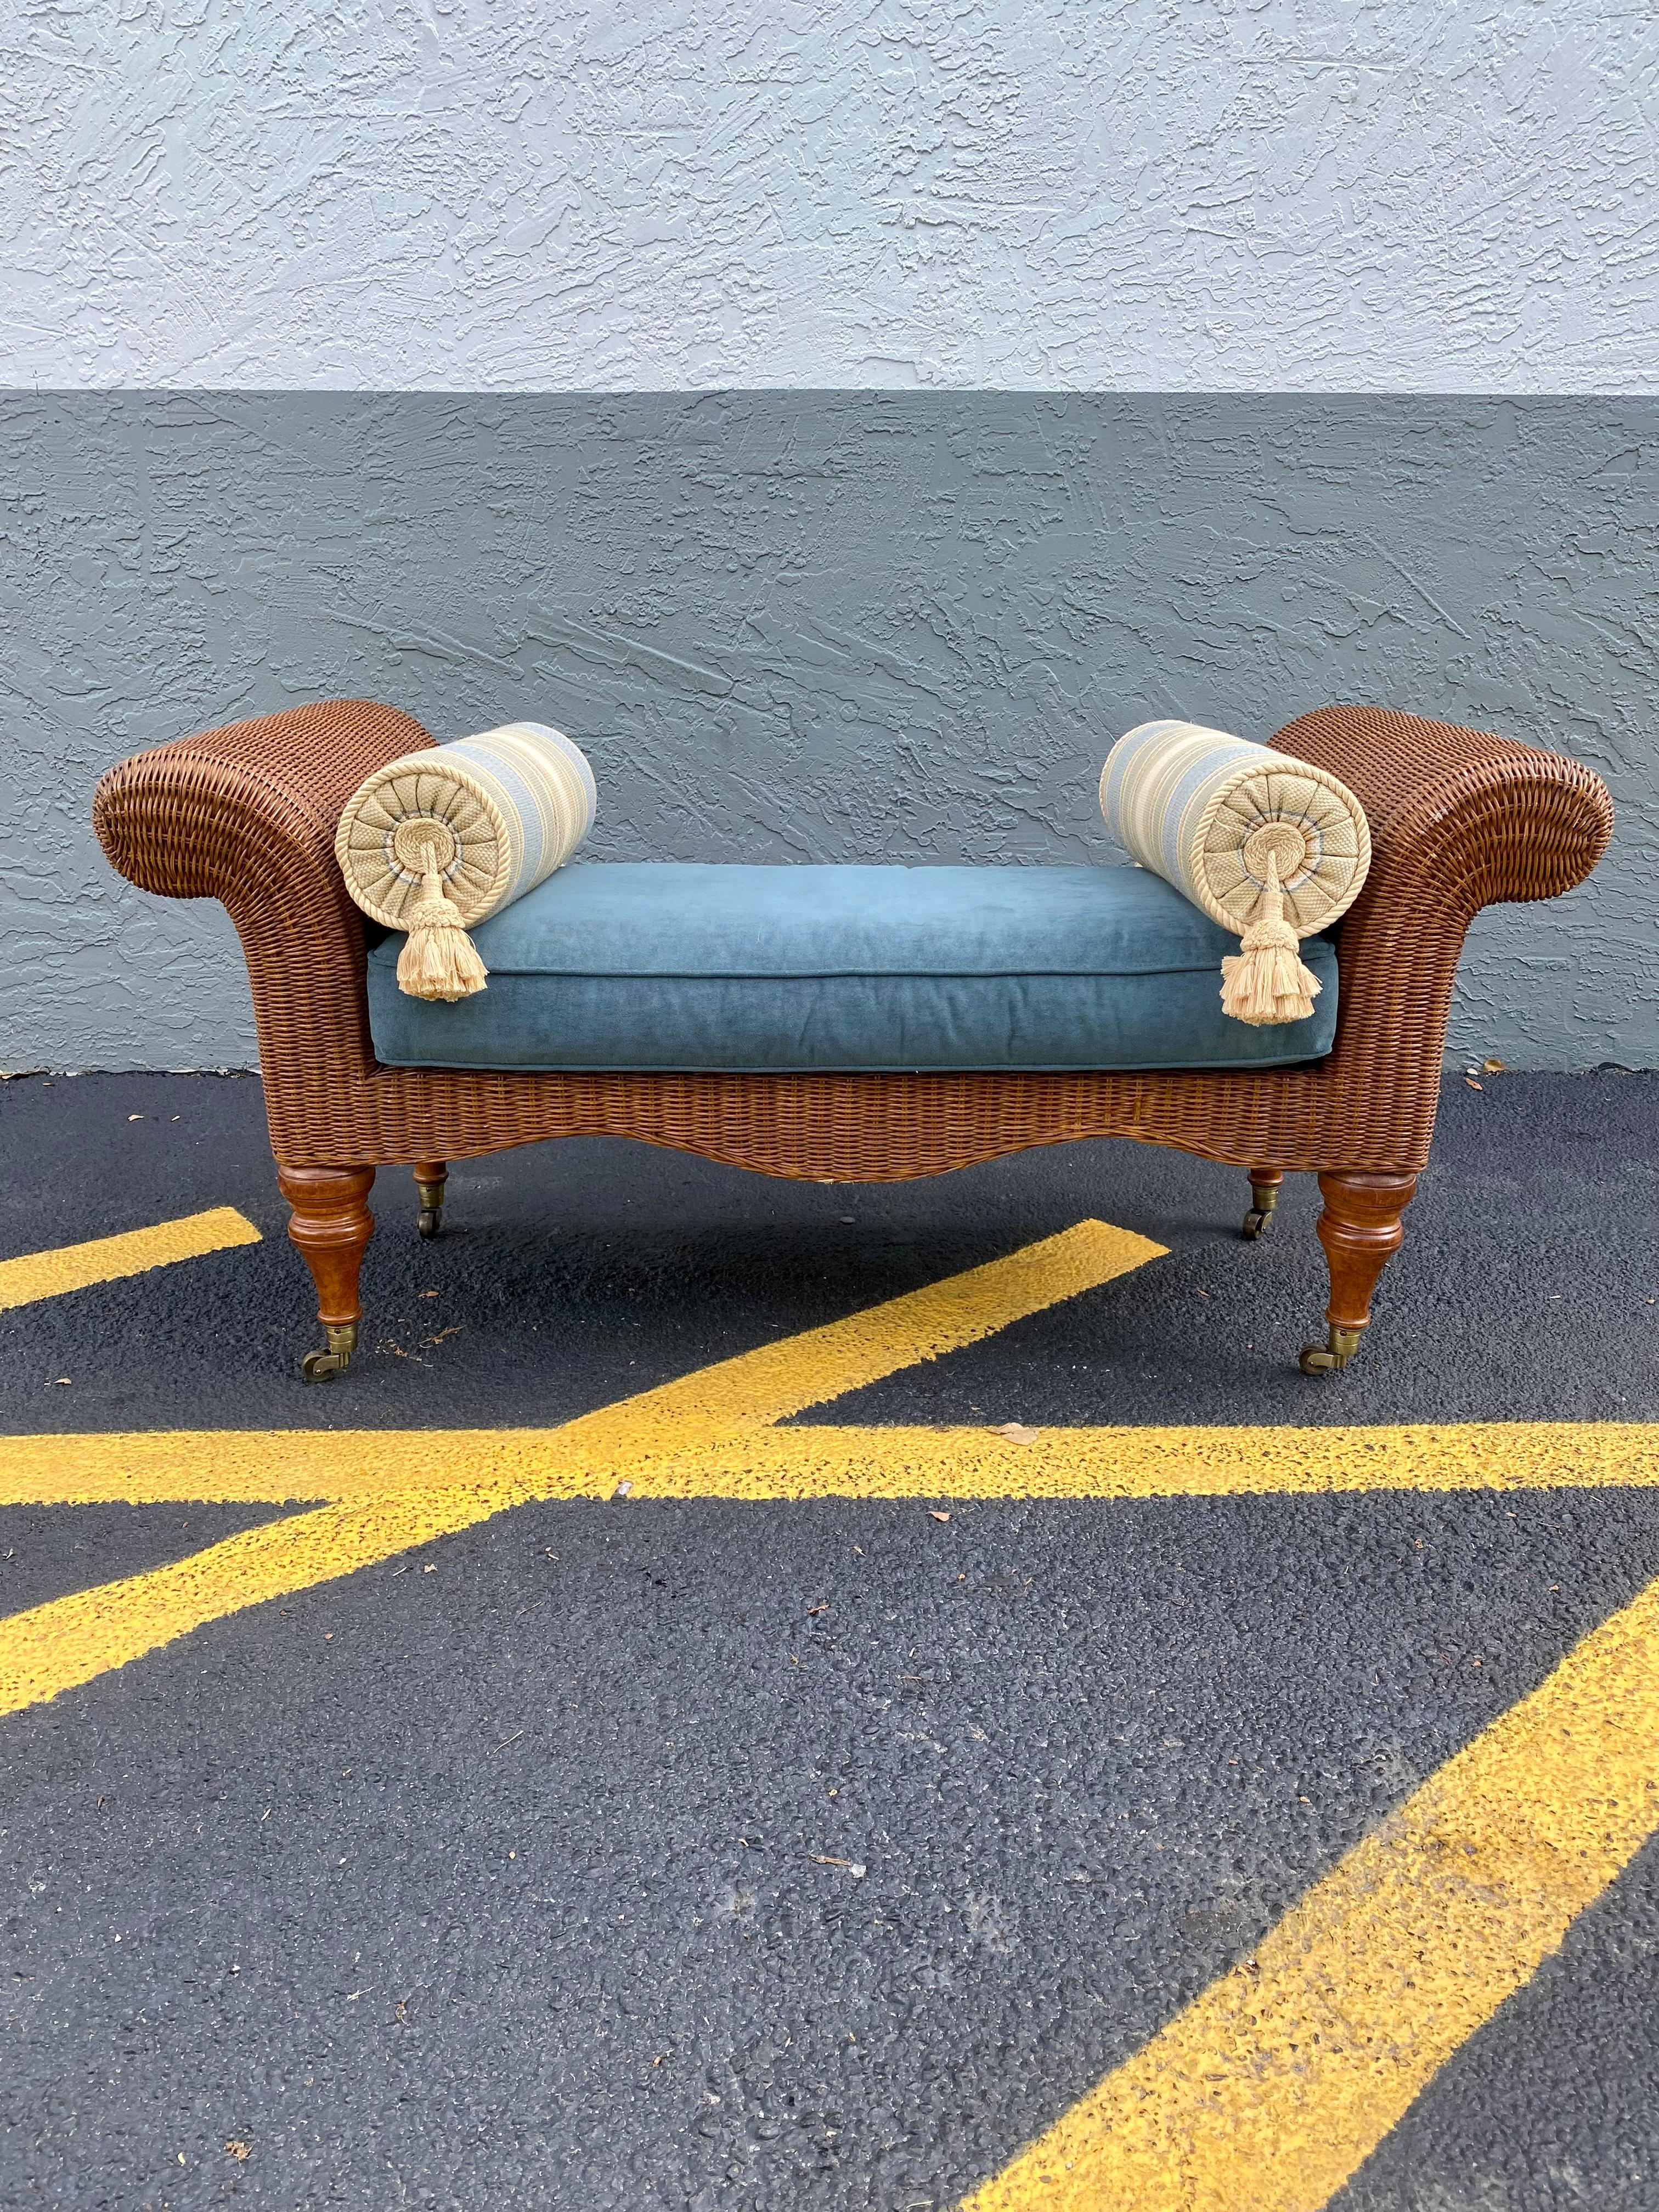 On offer on this occasion is one of the most stunning and rare, rattan bench  you could hope to find. Outstanding design is exhibited throughout. The beautiful bench is statement piece which is also extremely comfortable and packed with